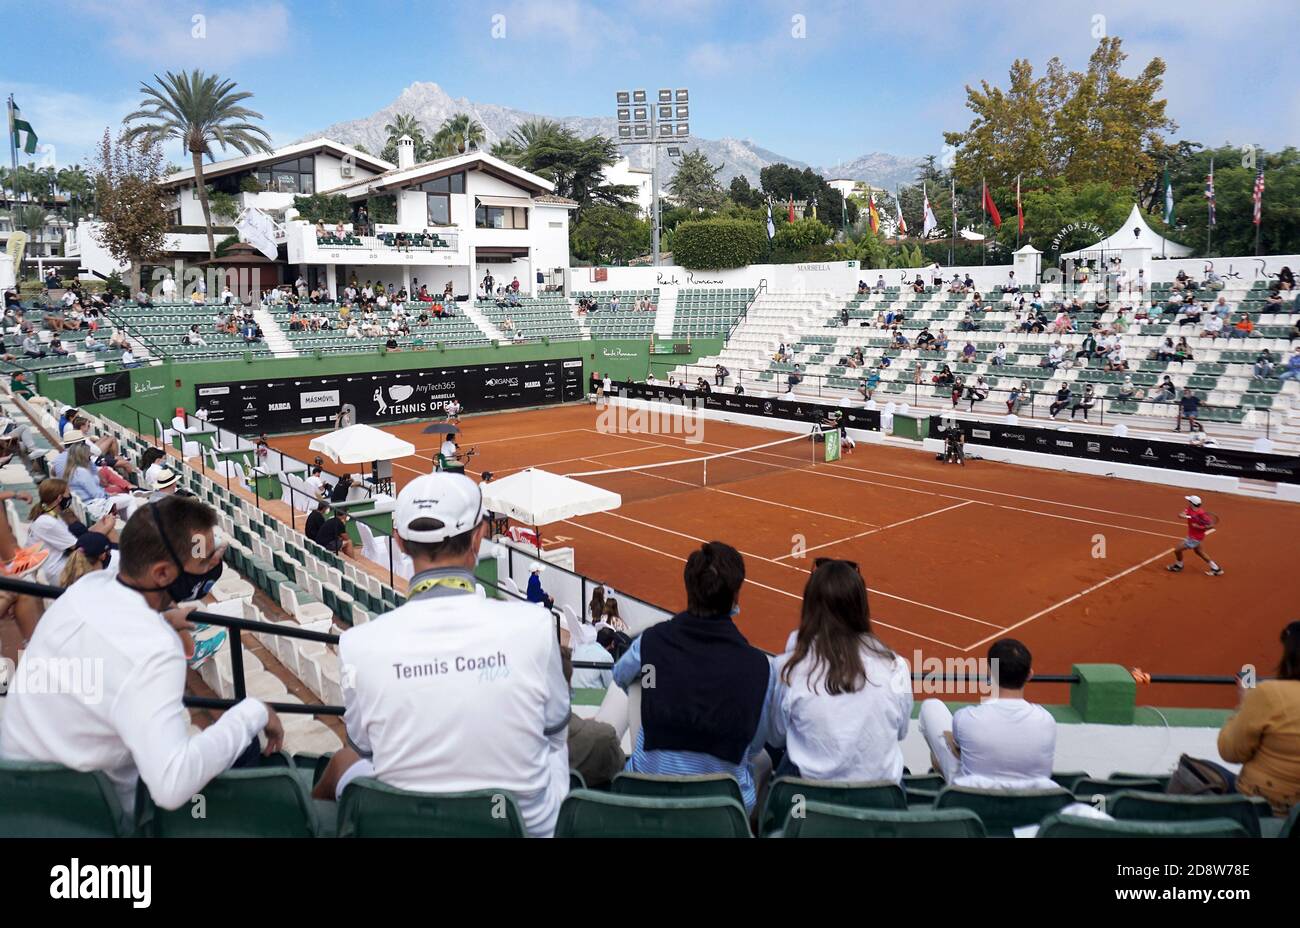 Marbella, Spain. 1st Nov 2020 #ATP Tennis Challengers Tour. AnyTech 365  #Marbella Open #Puente Romano Tennis Club Marbella Spain.11.01.2020.  Security for entry on final day and Centre Court view. Credit: Leo Mason